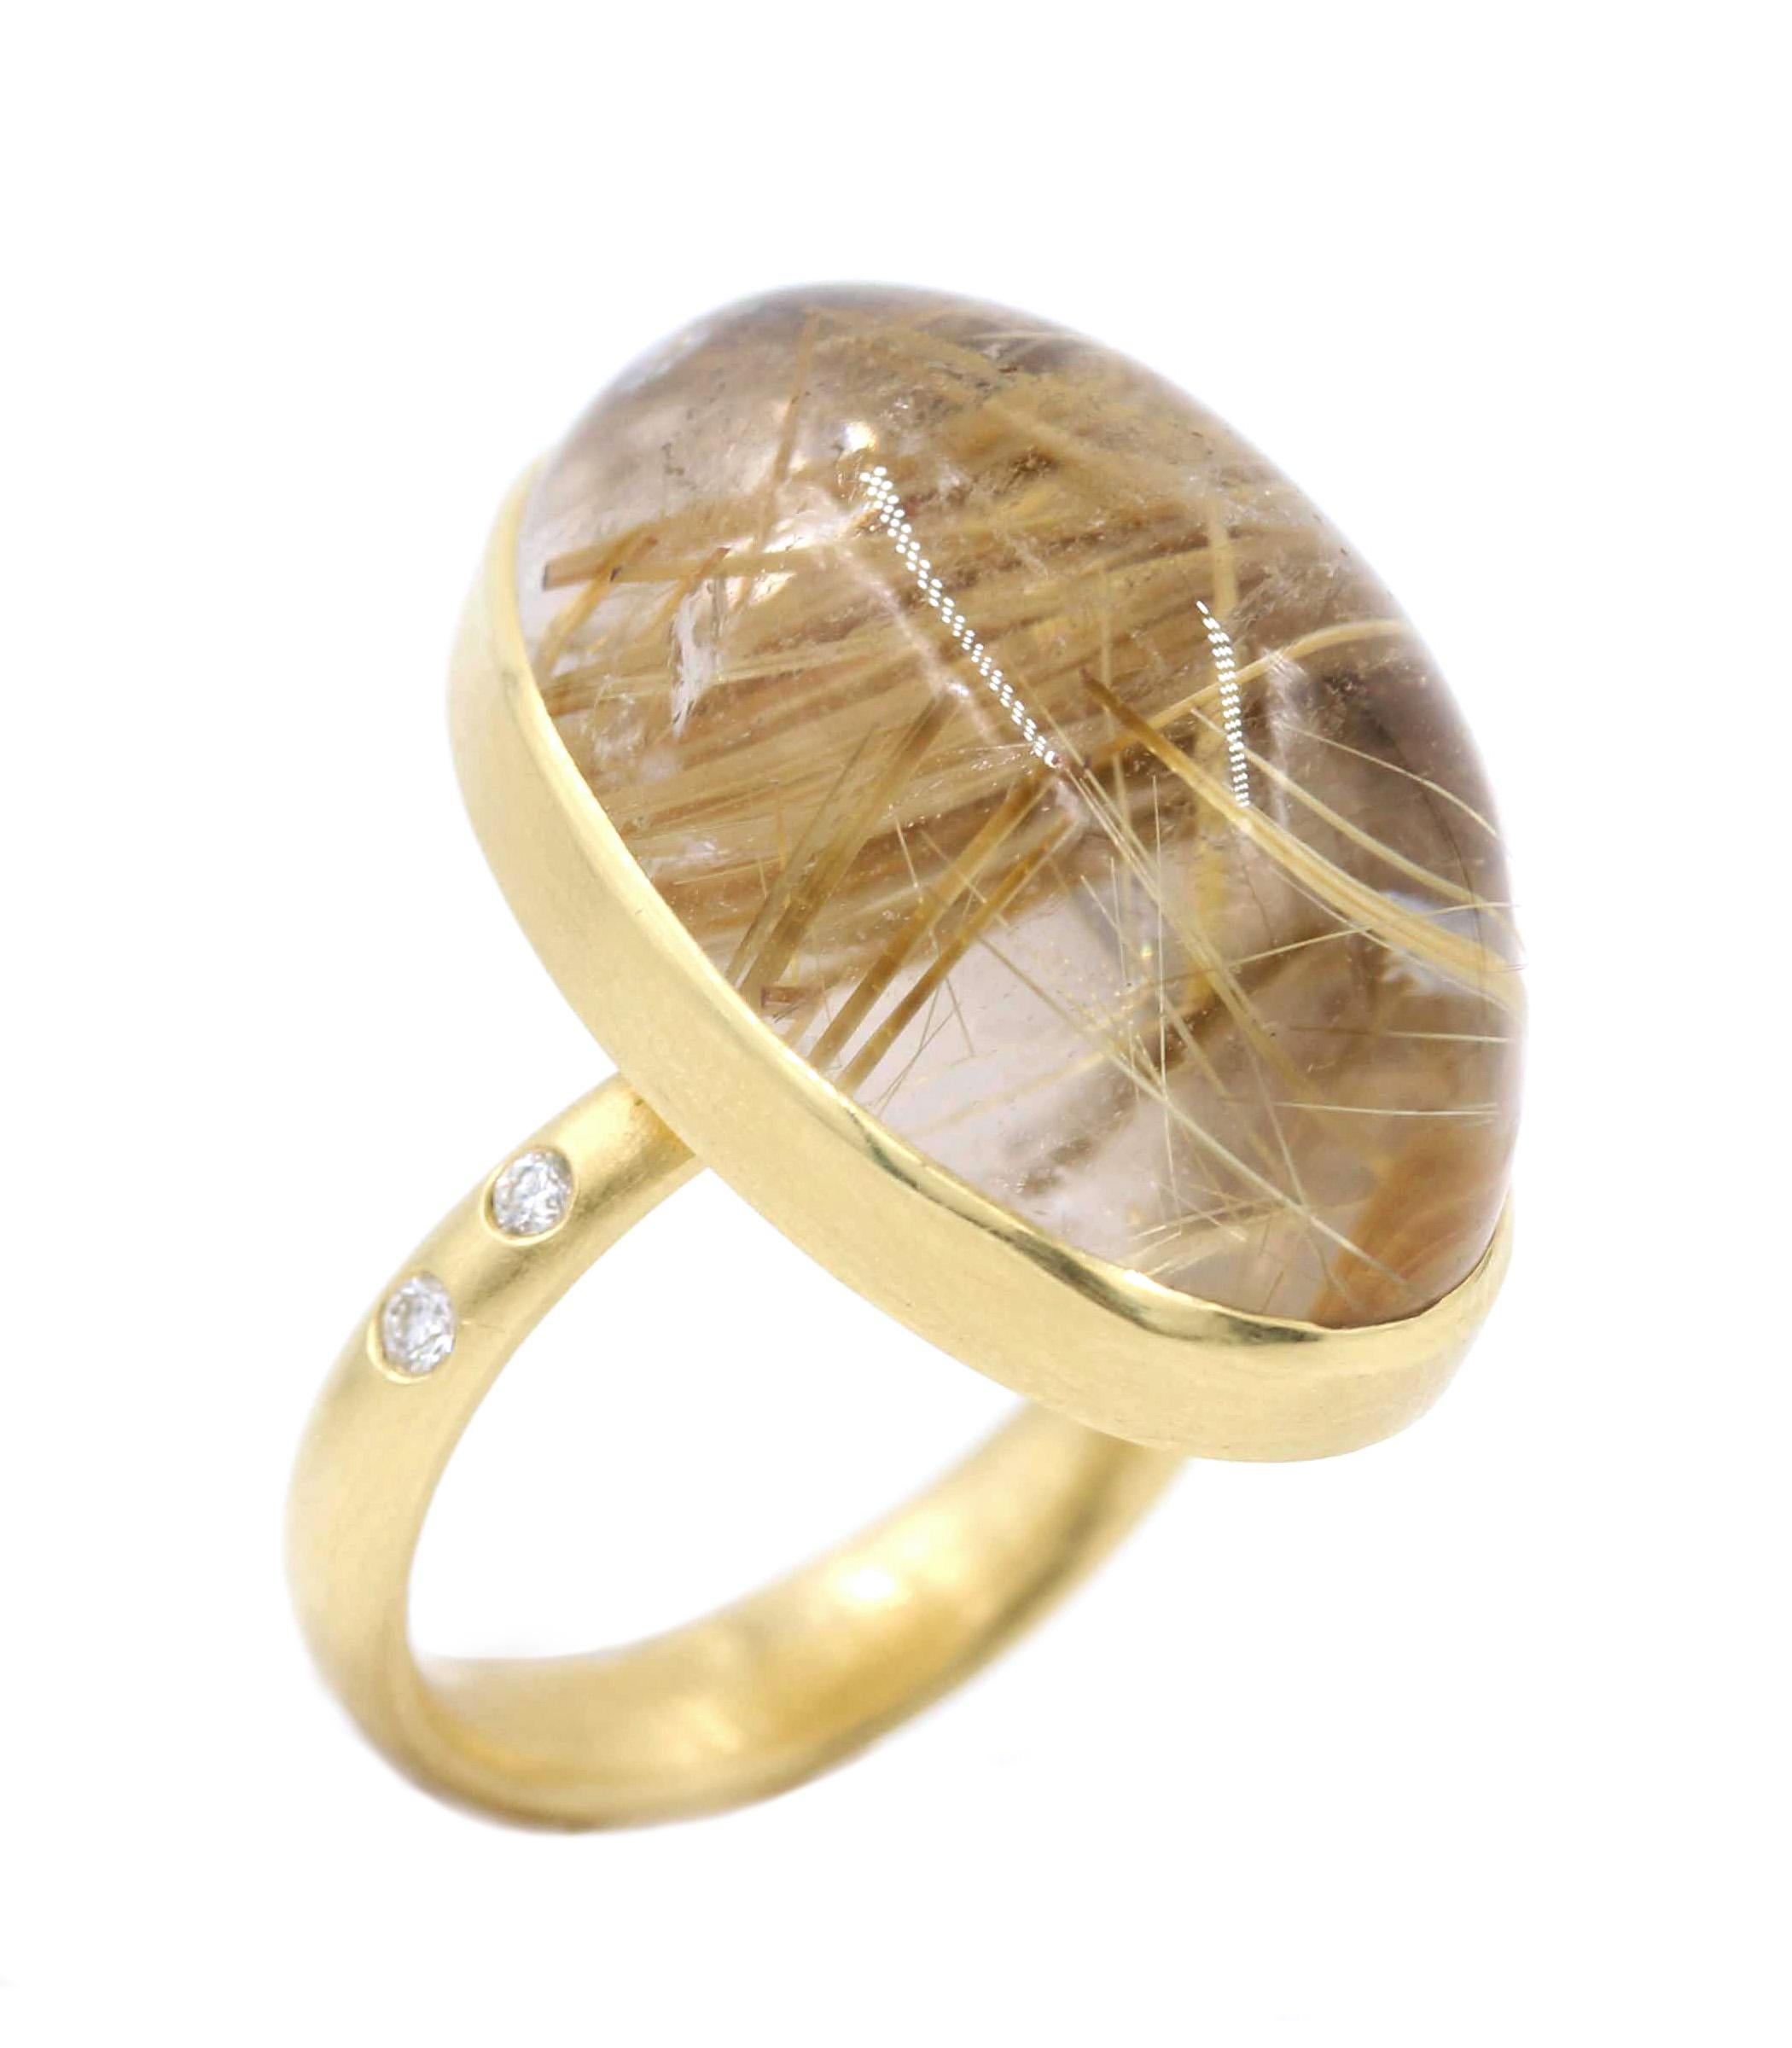 Robin Waynee
Rutilated Quartz Ring, 2018
18K Ring Featring a 28.39ct Rutilated Quartz, & VS1 Diamonds (.09ctw)

Robin has an unprecedented record at the Saul Bell Design Awards, one of the most prestigious international jewelry competitions. She